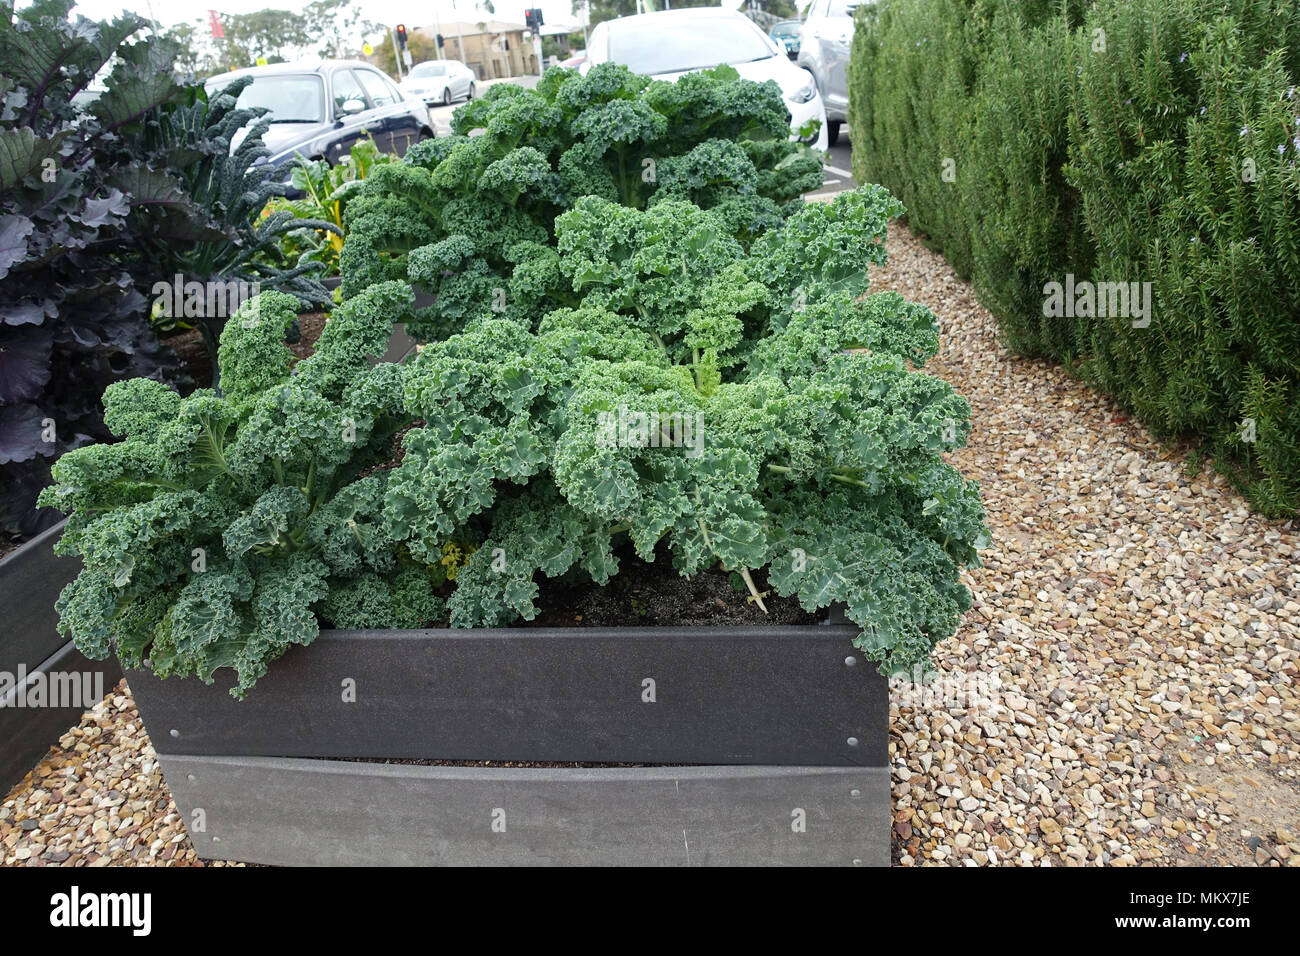 Growing Brassica oleracea or known as Dwarf Blue Scotch Kale on a vegetable patch Stock Photo